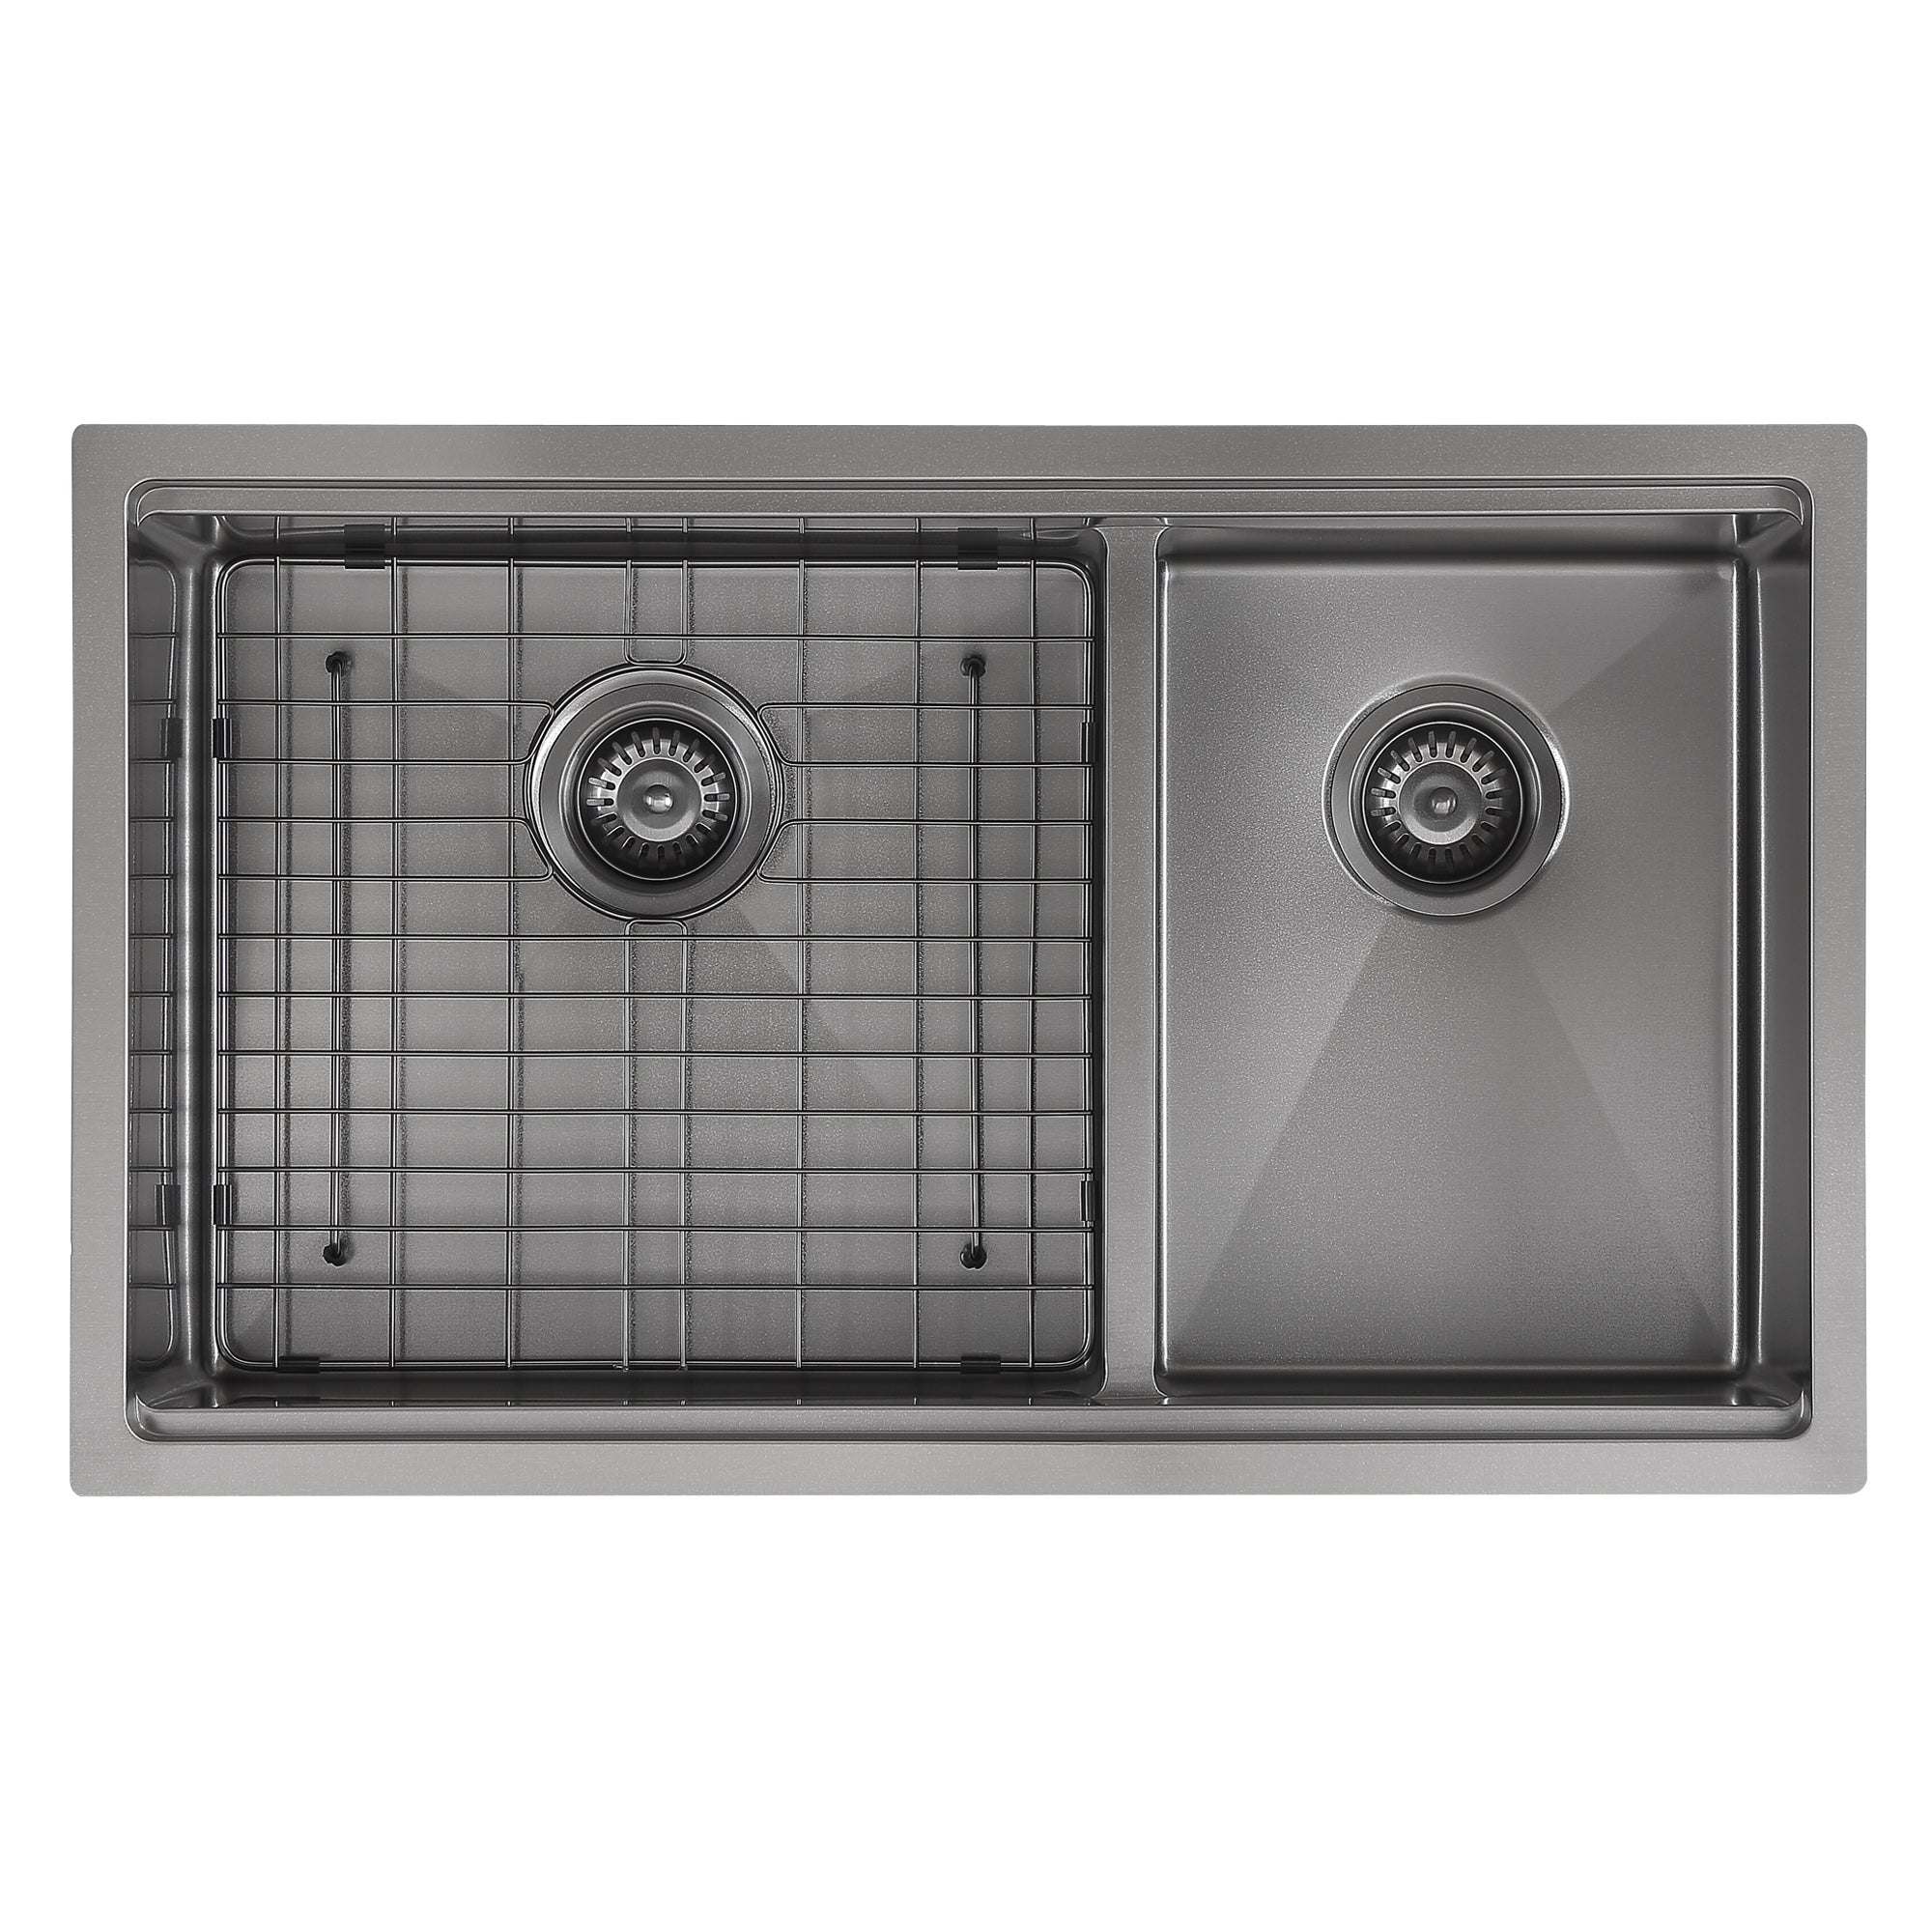 Ancona 32” 60/40 Double Bowl Undermount Kitchen Sink with Grid